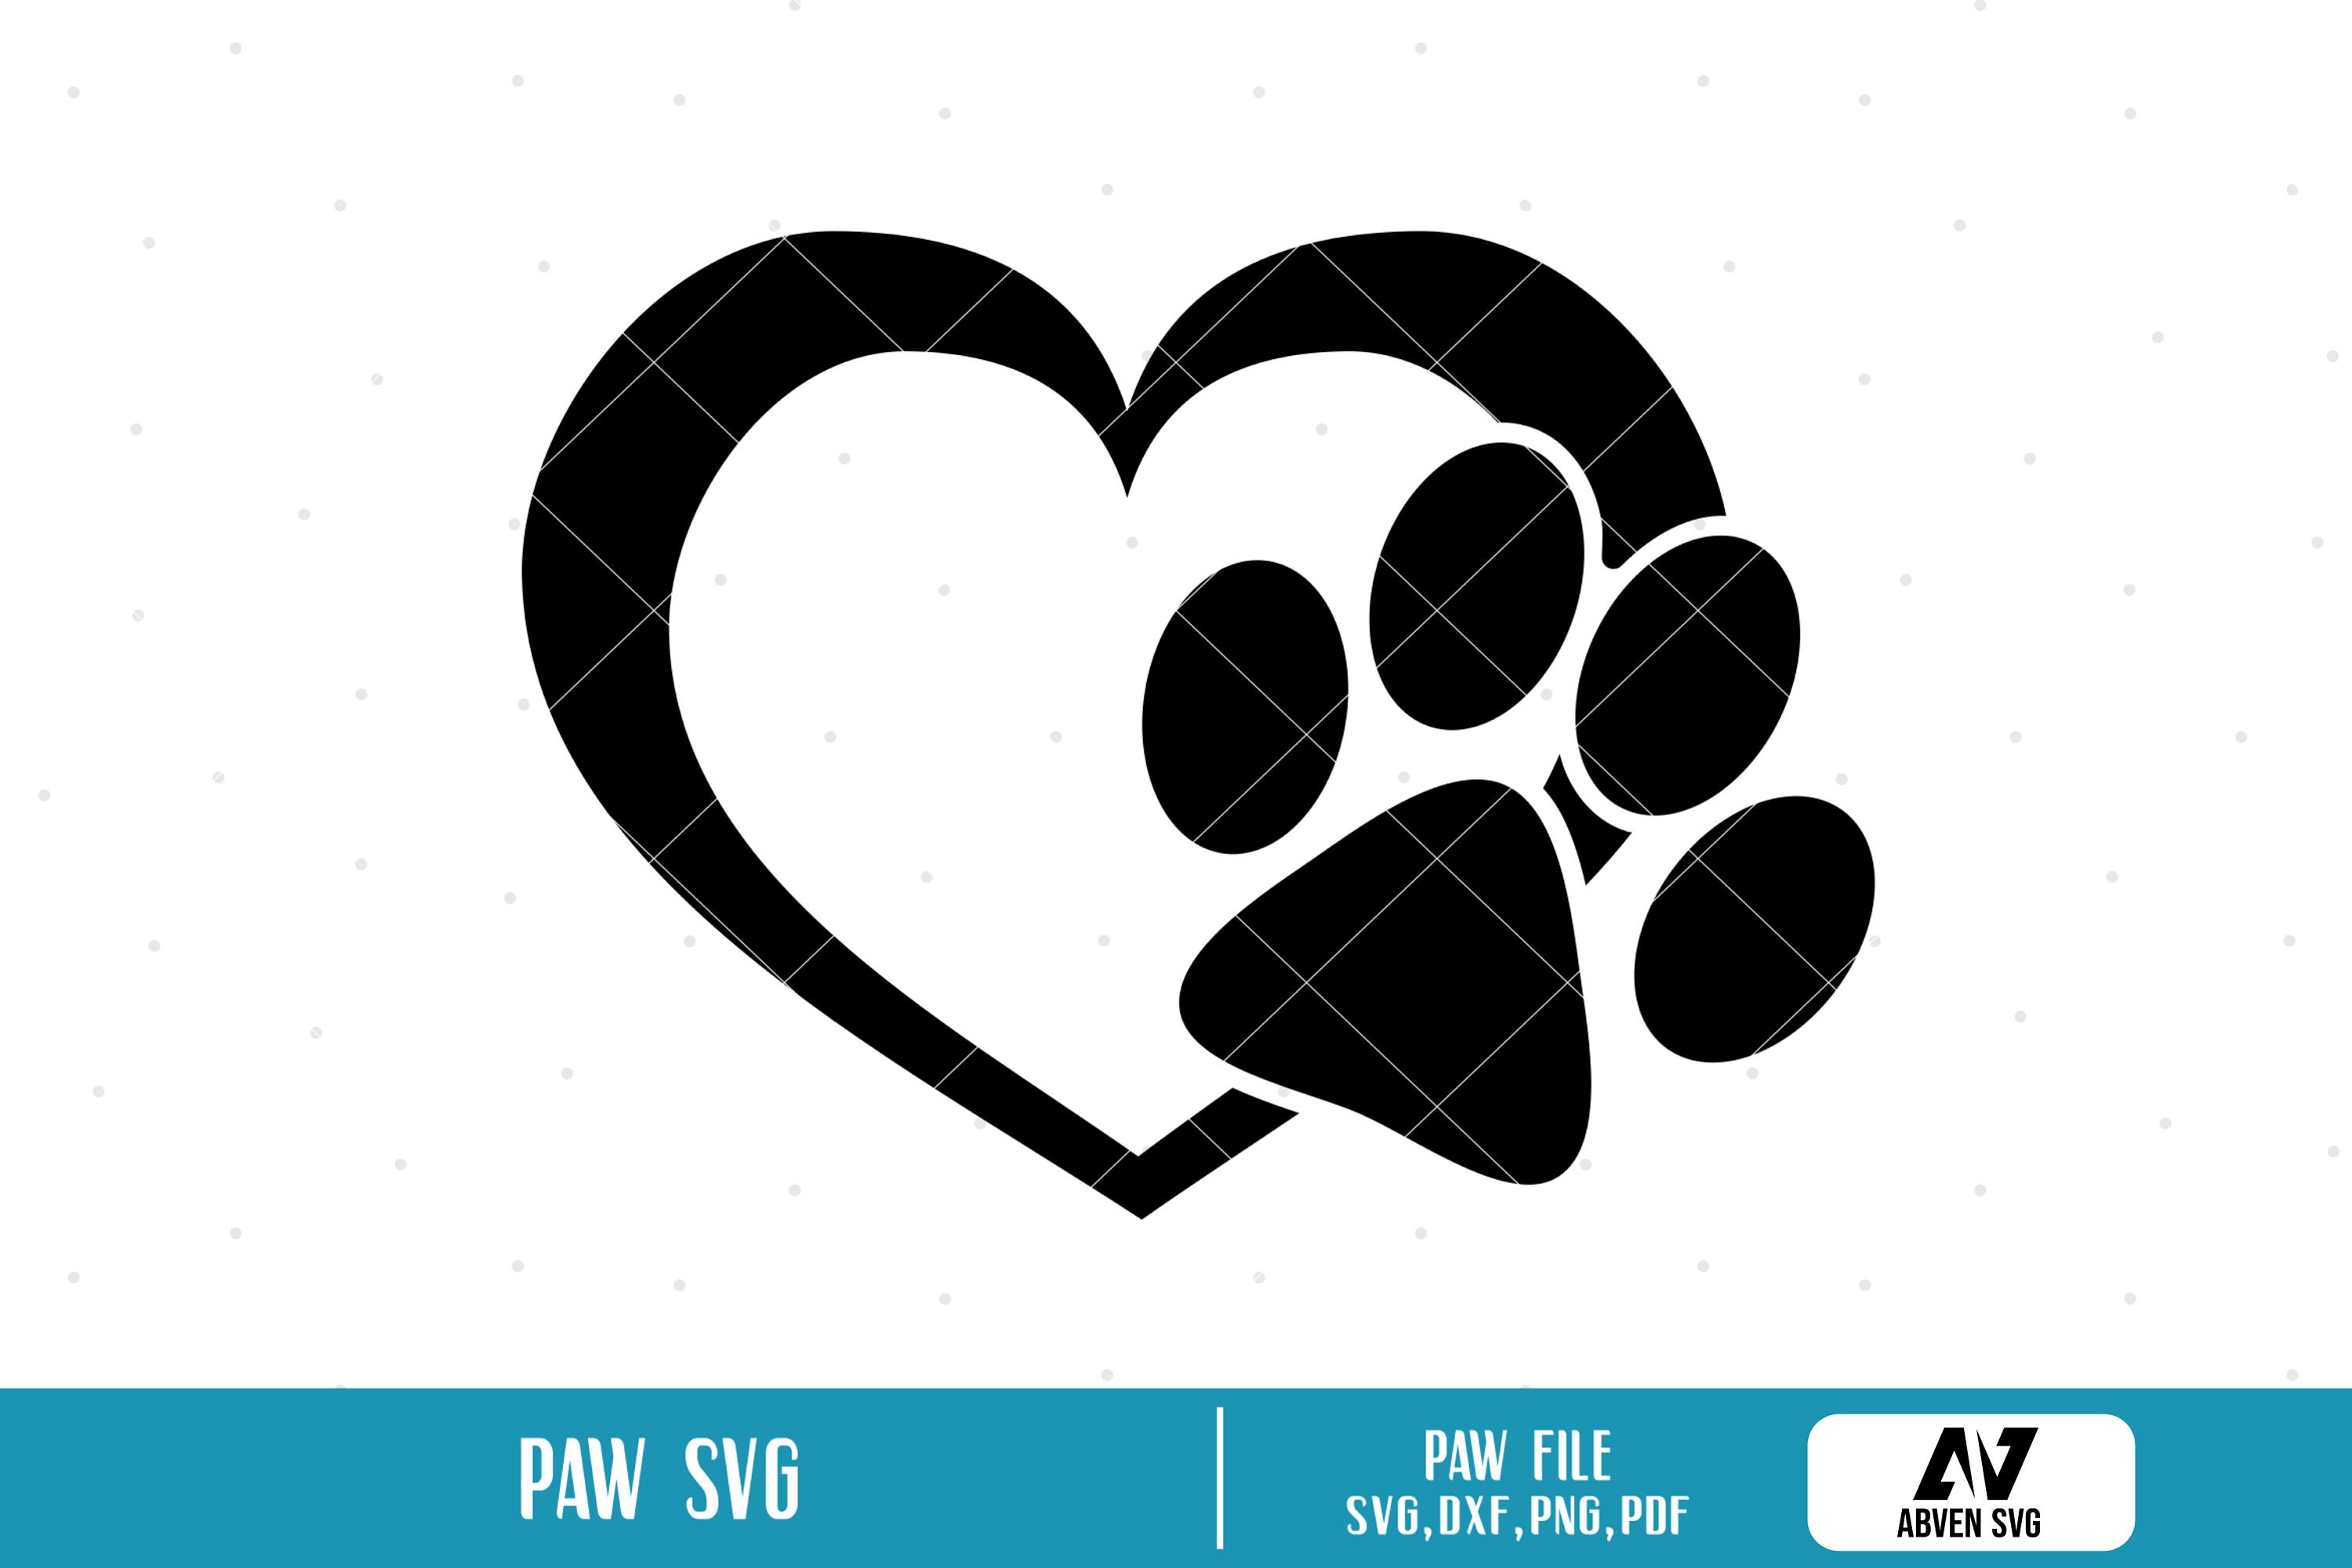 Paw Svg Paw Clip Art Paw Graphics Paw Heart Svg Heart Svg | Etsy